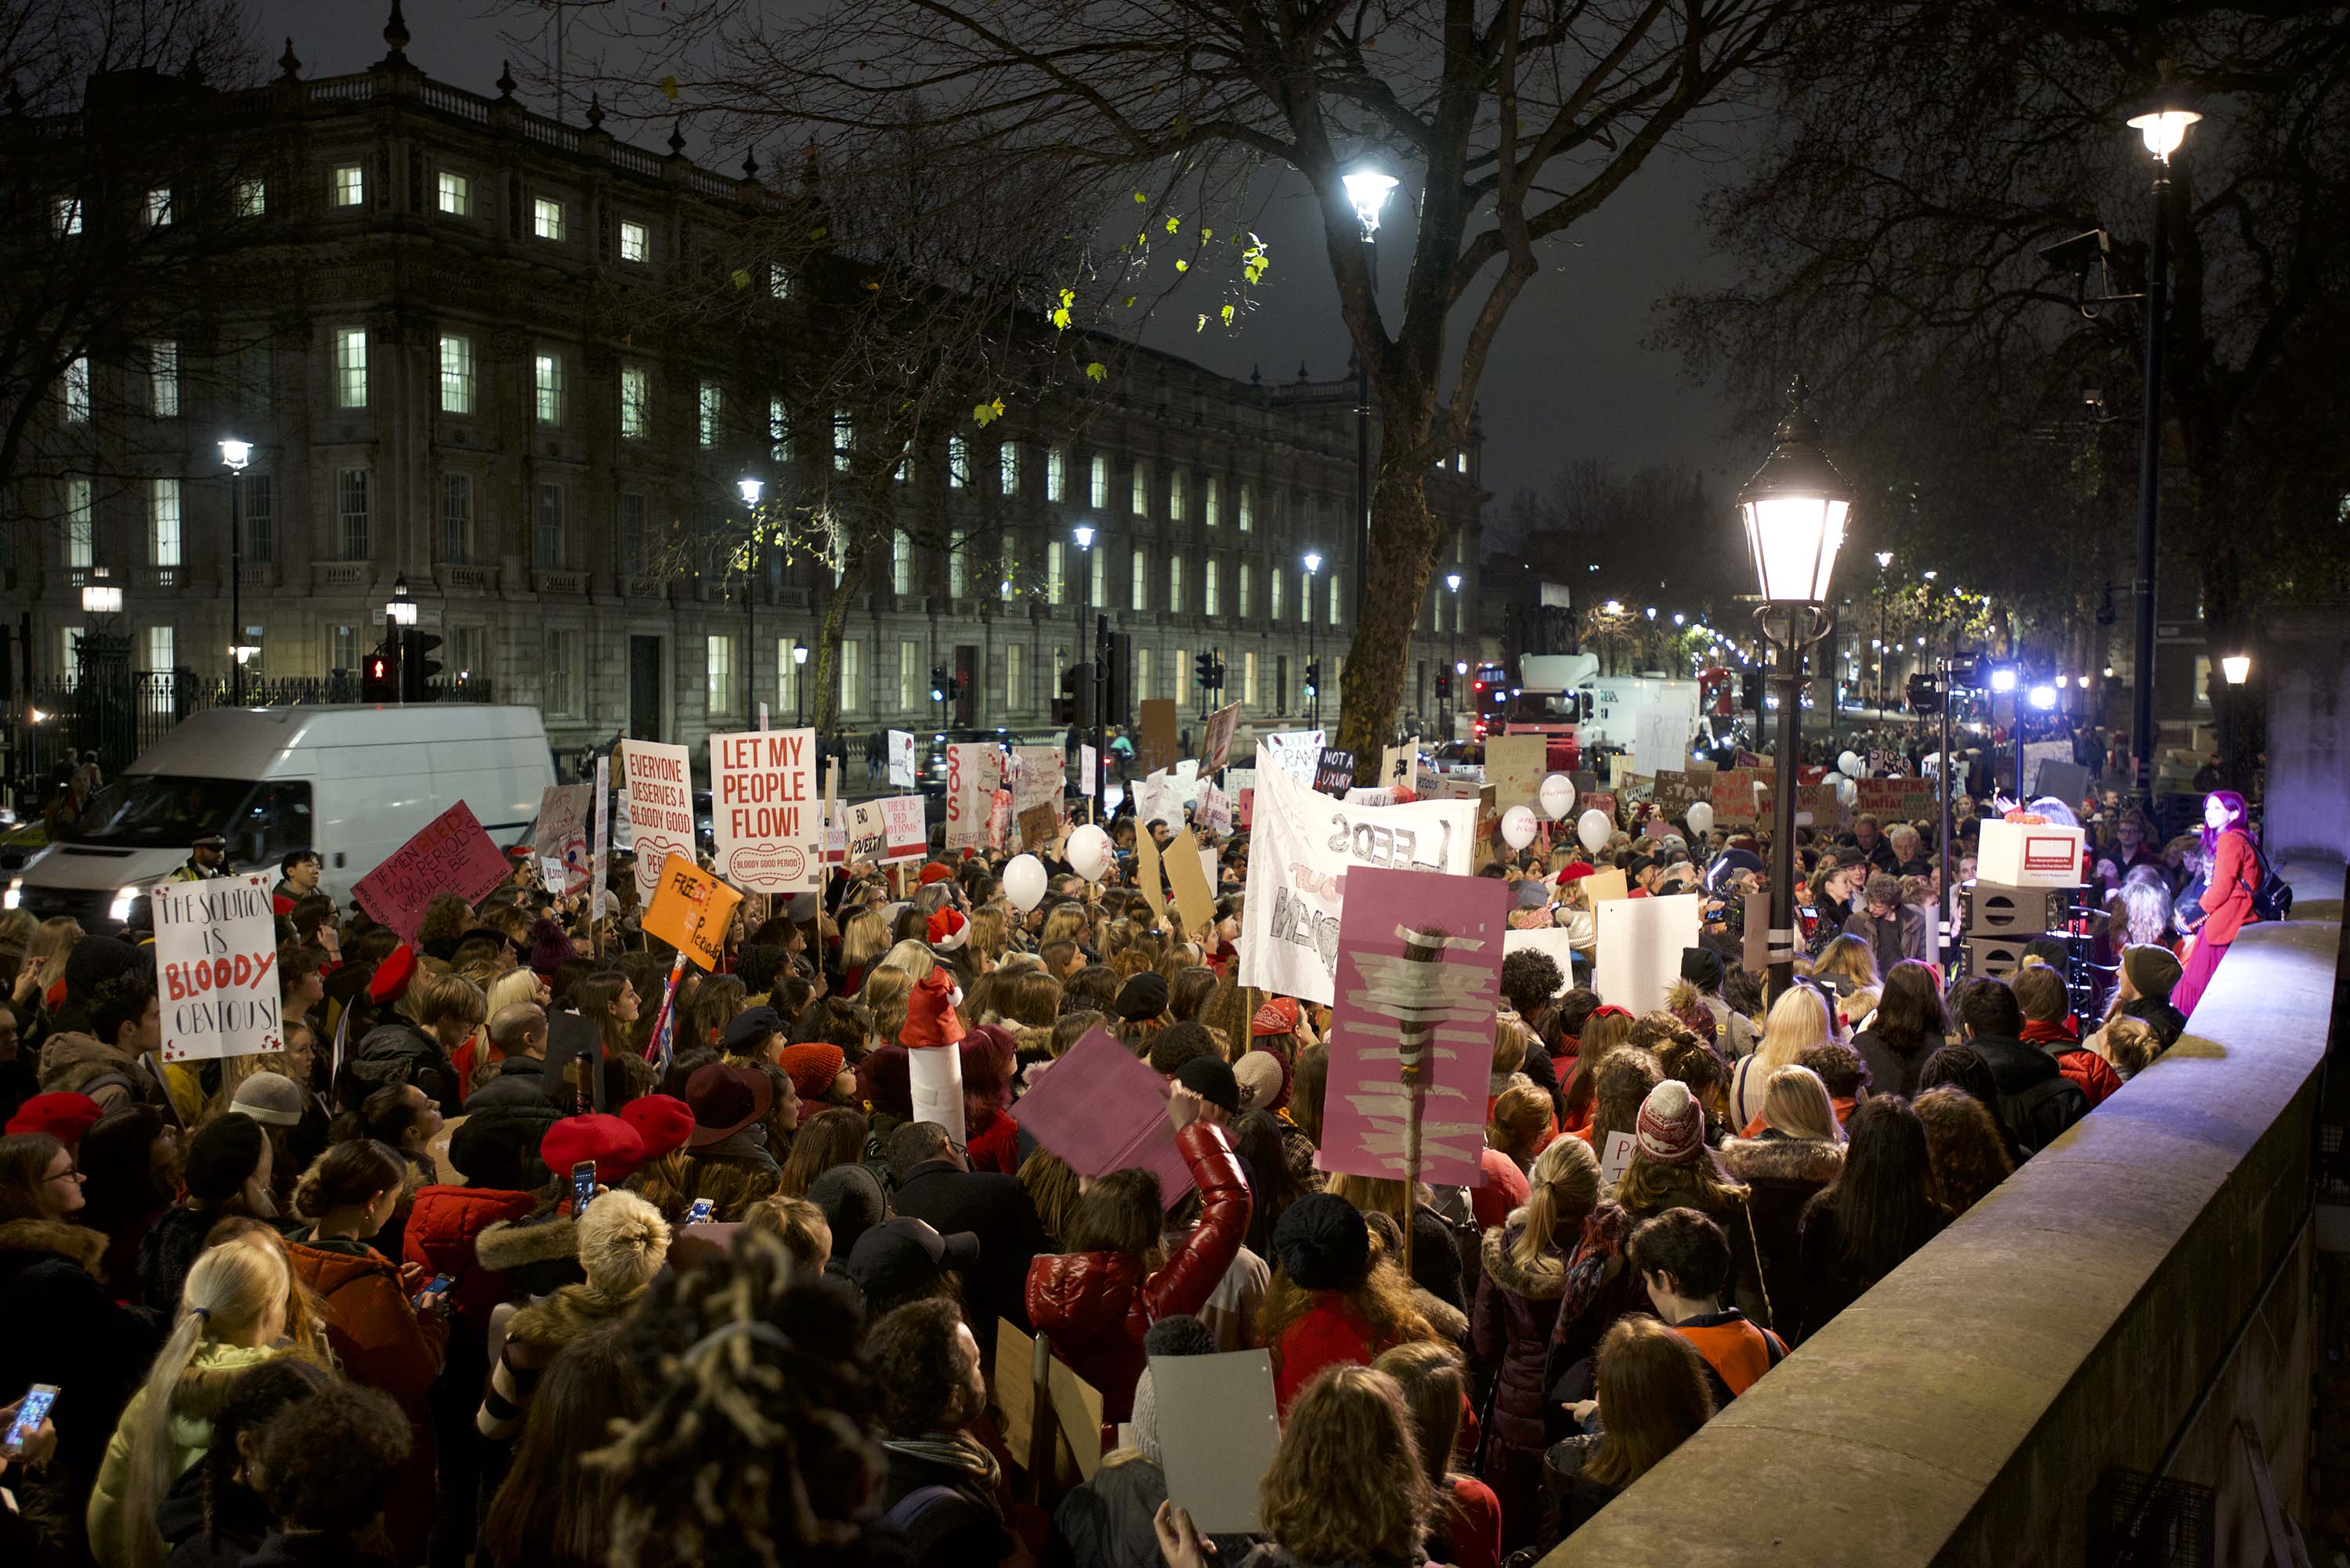 Hundreds turned out in London last December to protest against period poverty. Photo: Judith Vonberg for CNN